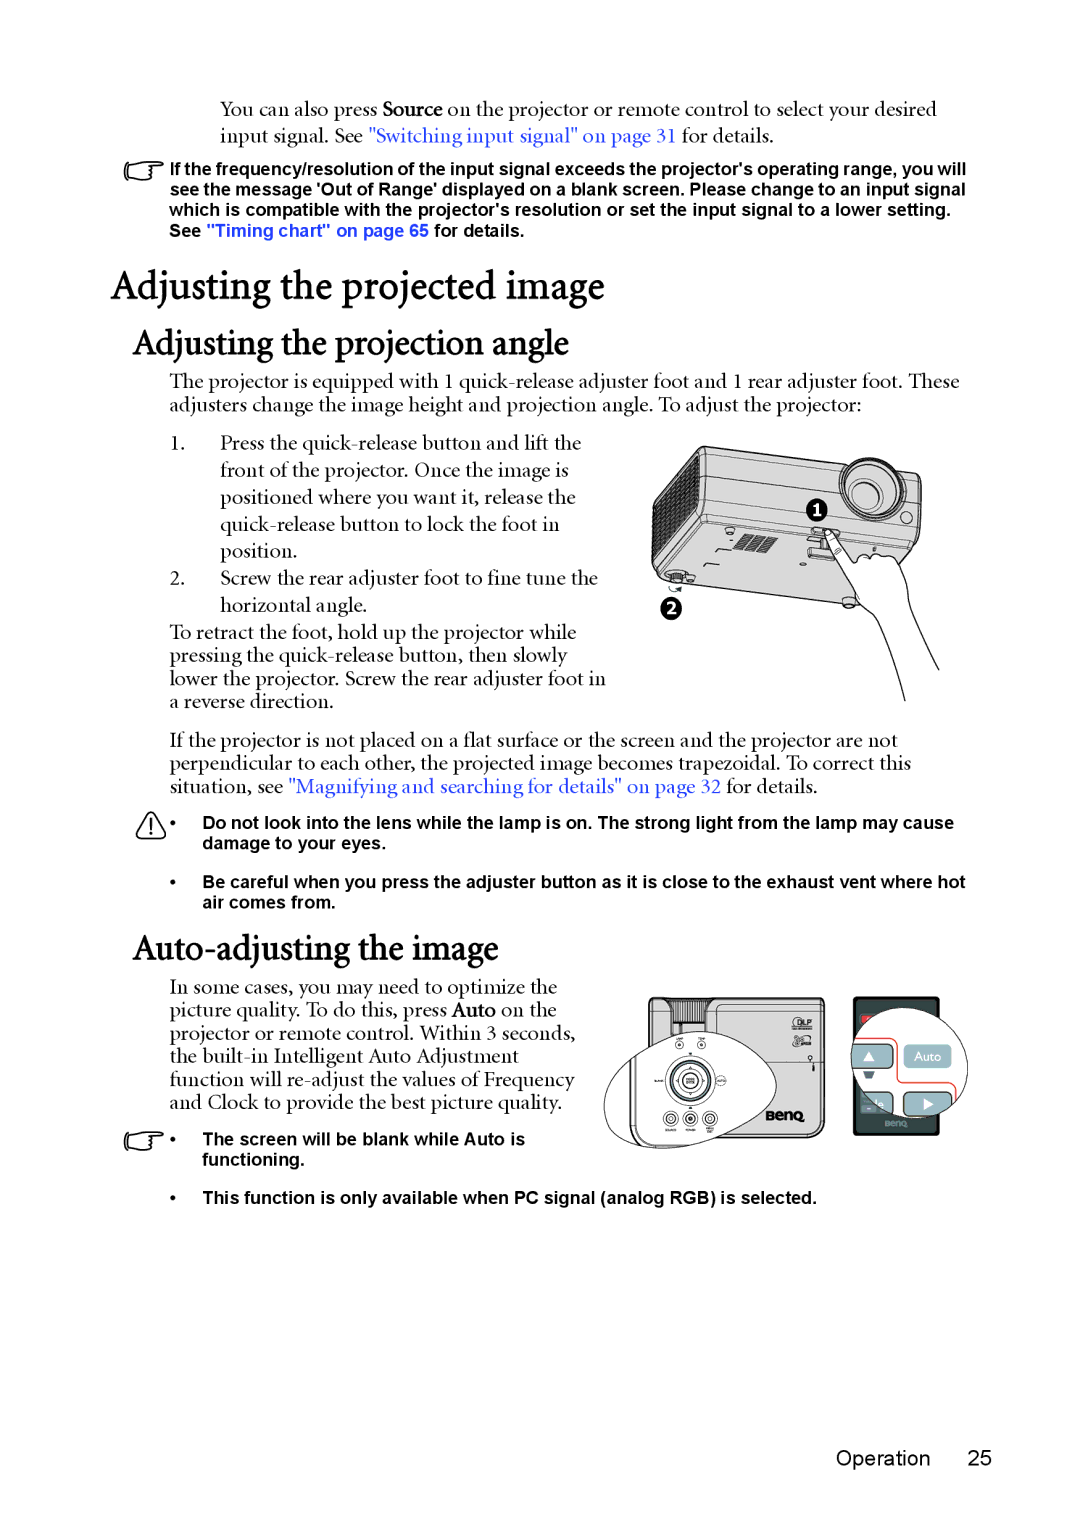 BenQ MW512 user manual Adjusting the projected image, Adjusting the projection angle, Auto-adjusting the image 